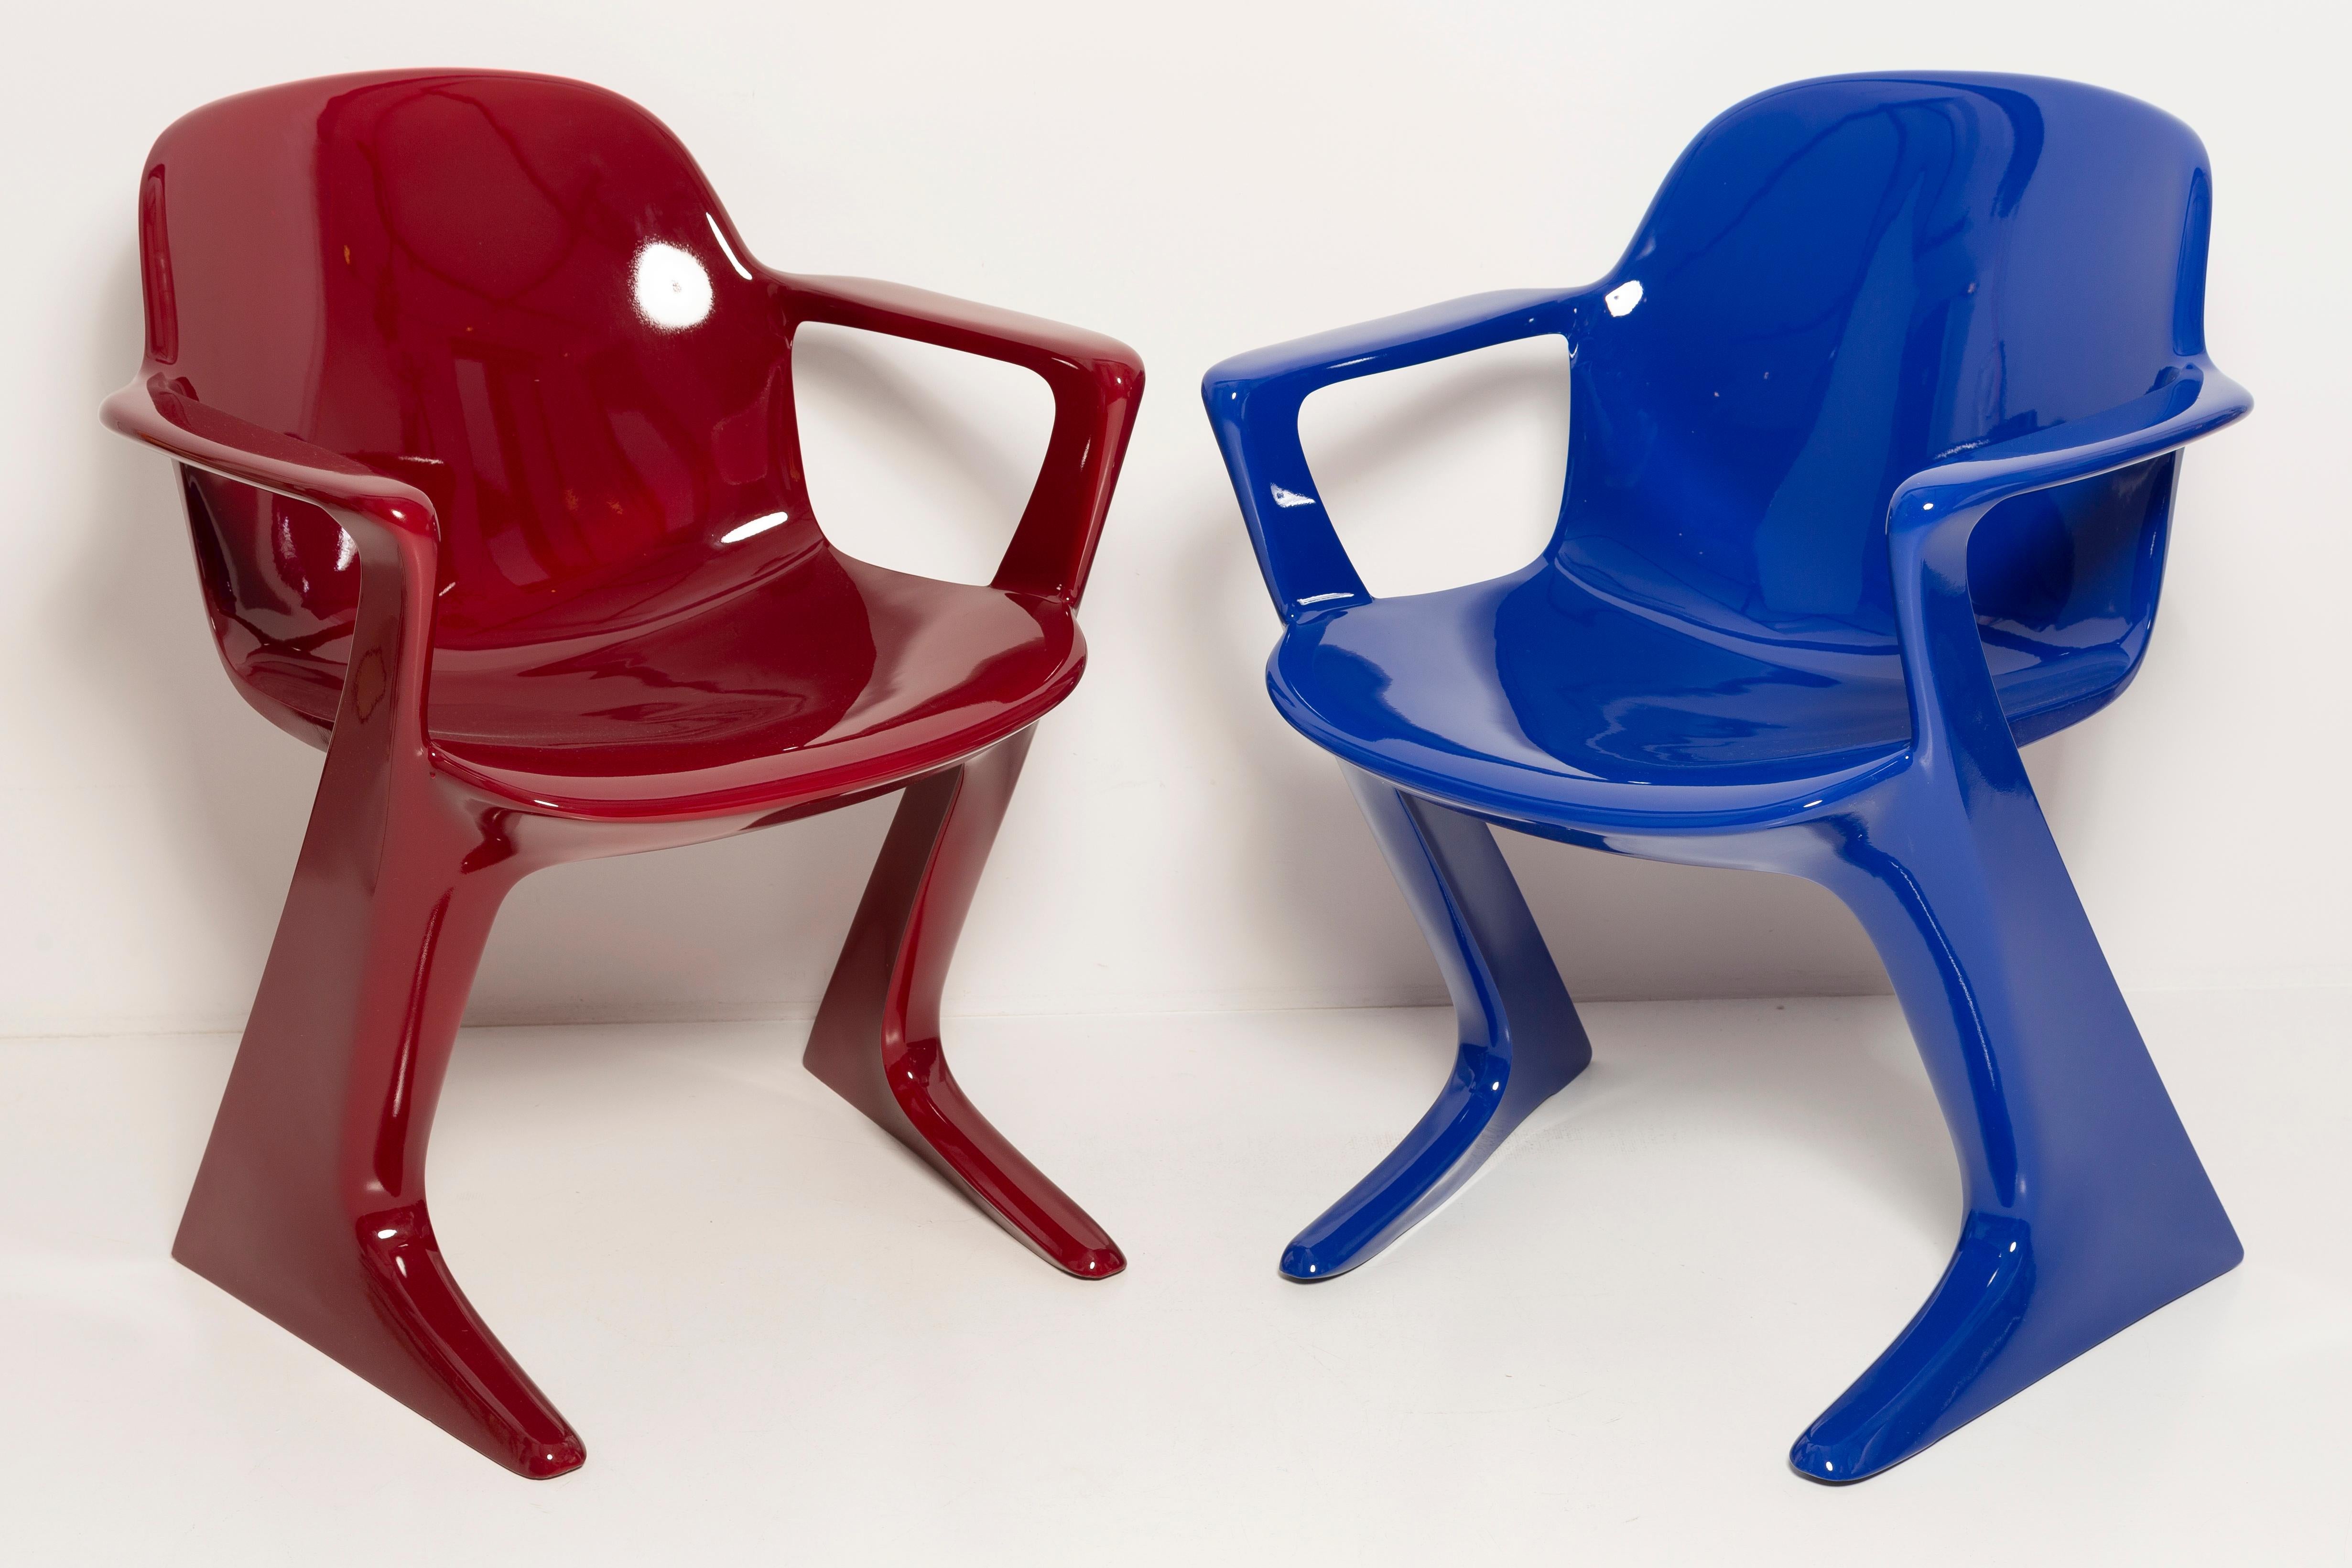 Two Mid-Century Burgundy Red and Blue Kangaroo Chairs Ernst Moeckl Germany, 1968 For Sale 2